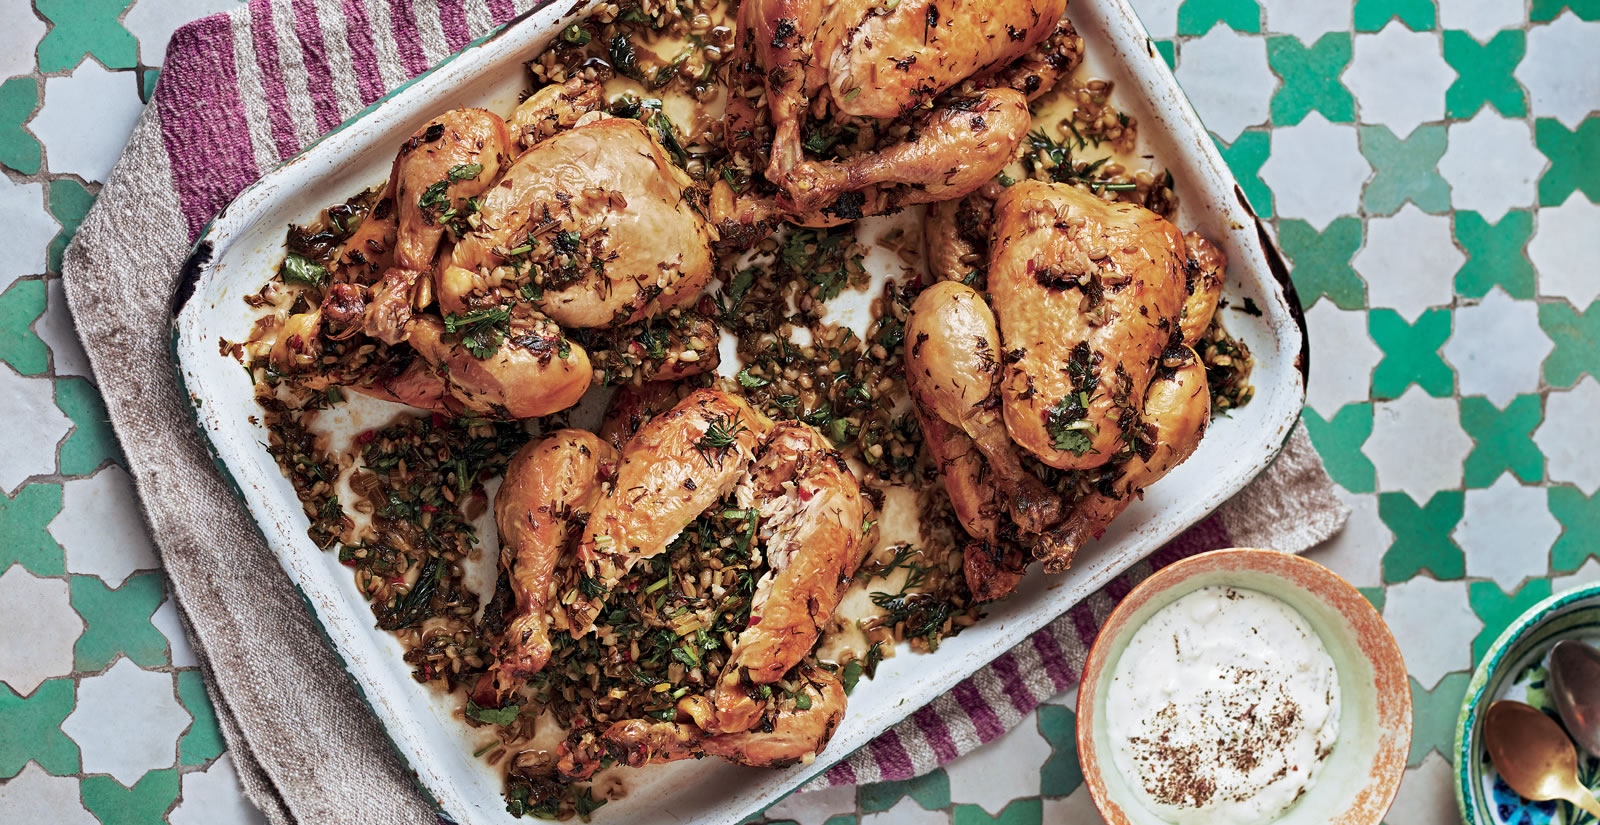 Flavors: Poulet Stuffed with Herb-Infused Freekeh